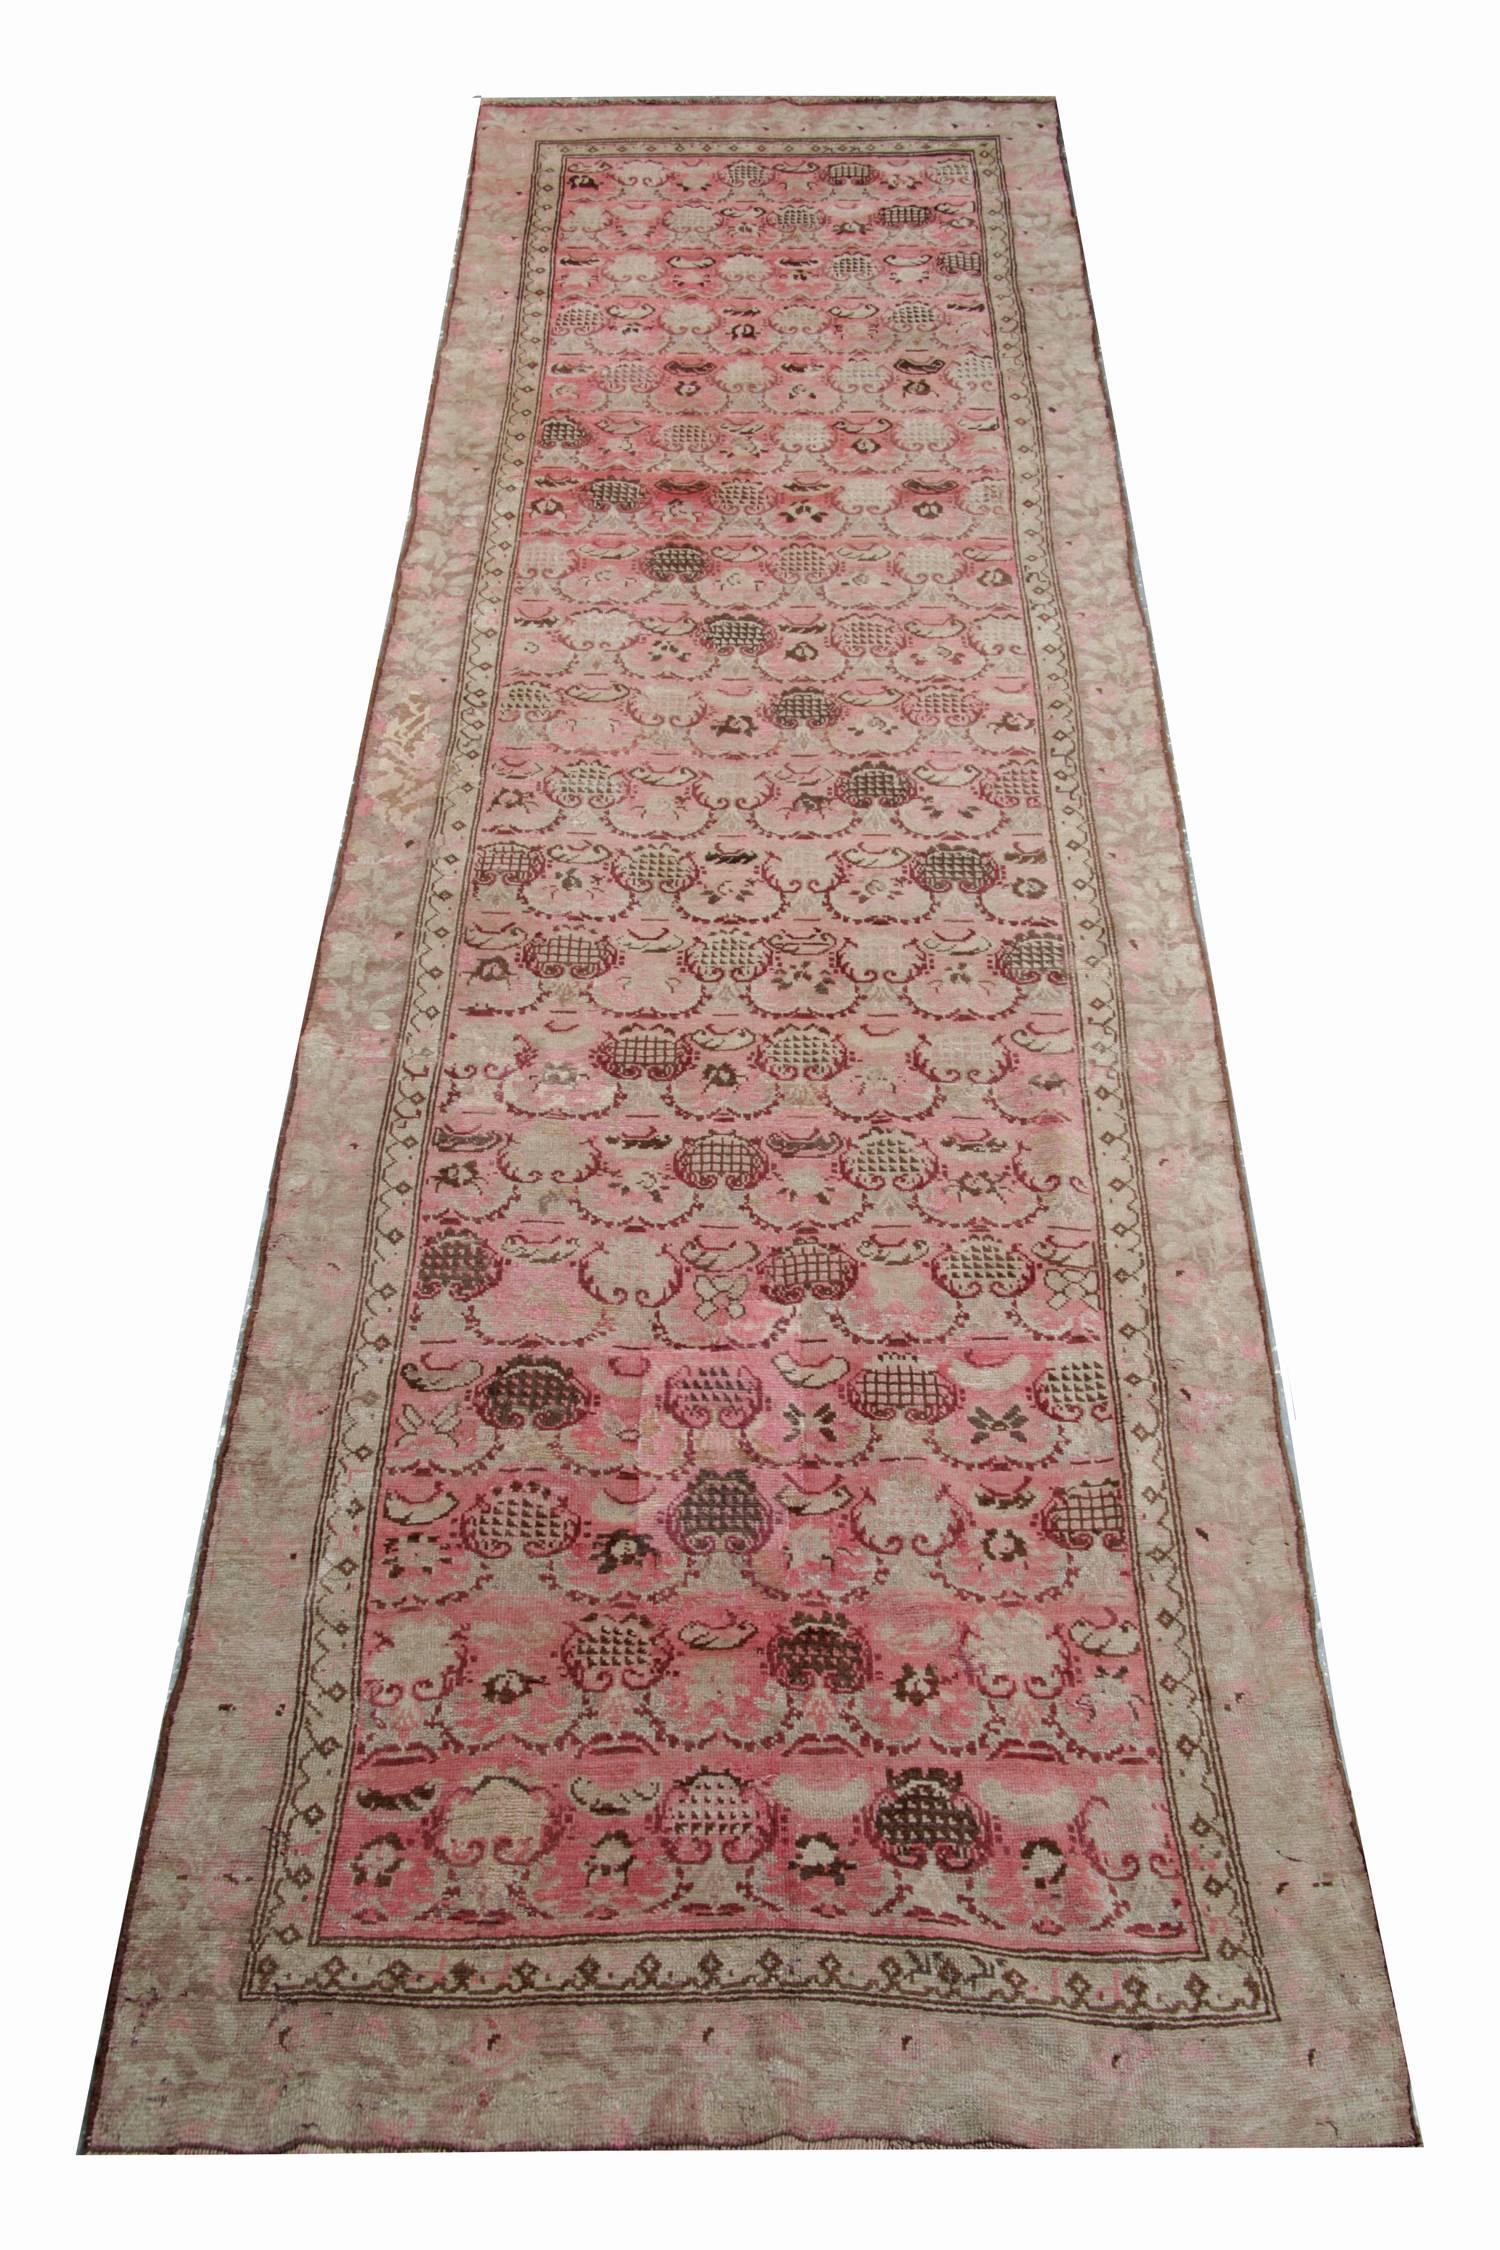 The Antique rug Karabagh runner is well over 140 years old, circa the 1870s. In this Pink rug with most appealing muted soft salmon colour and light brown, we can see traditional rugs style which can be suitable as stair runners. These oriental rug